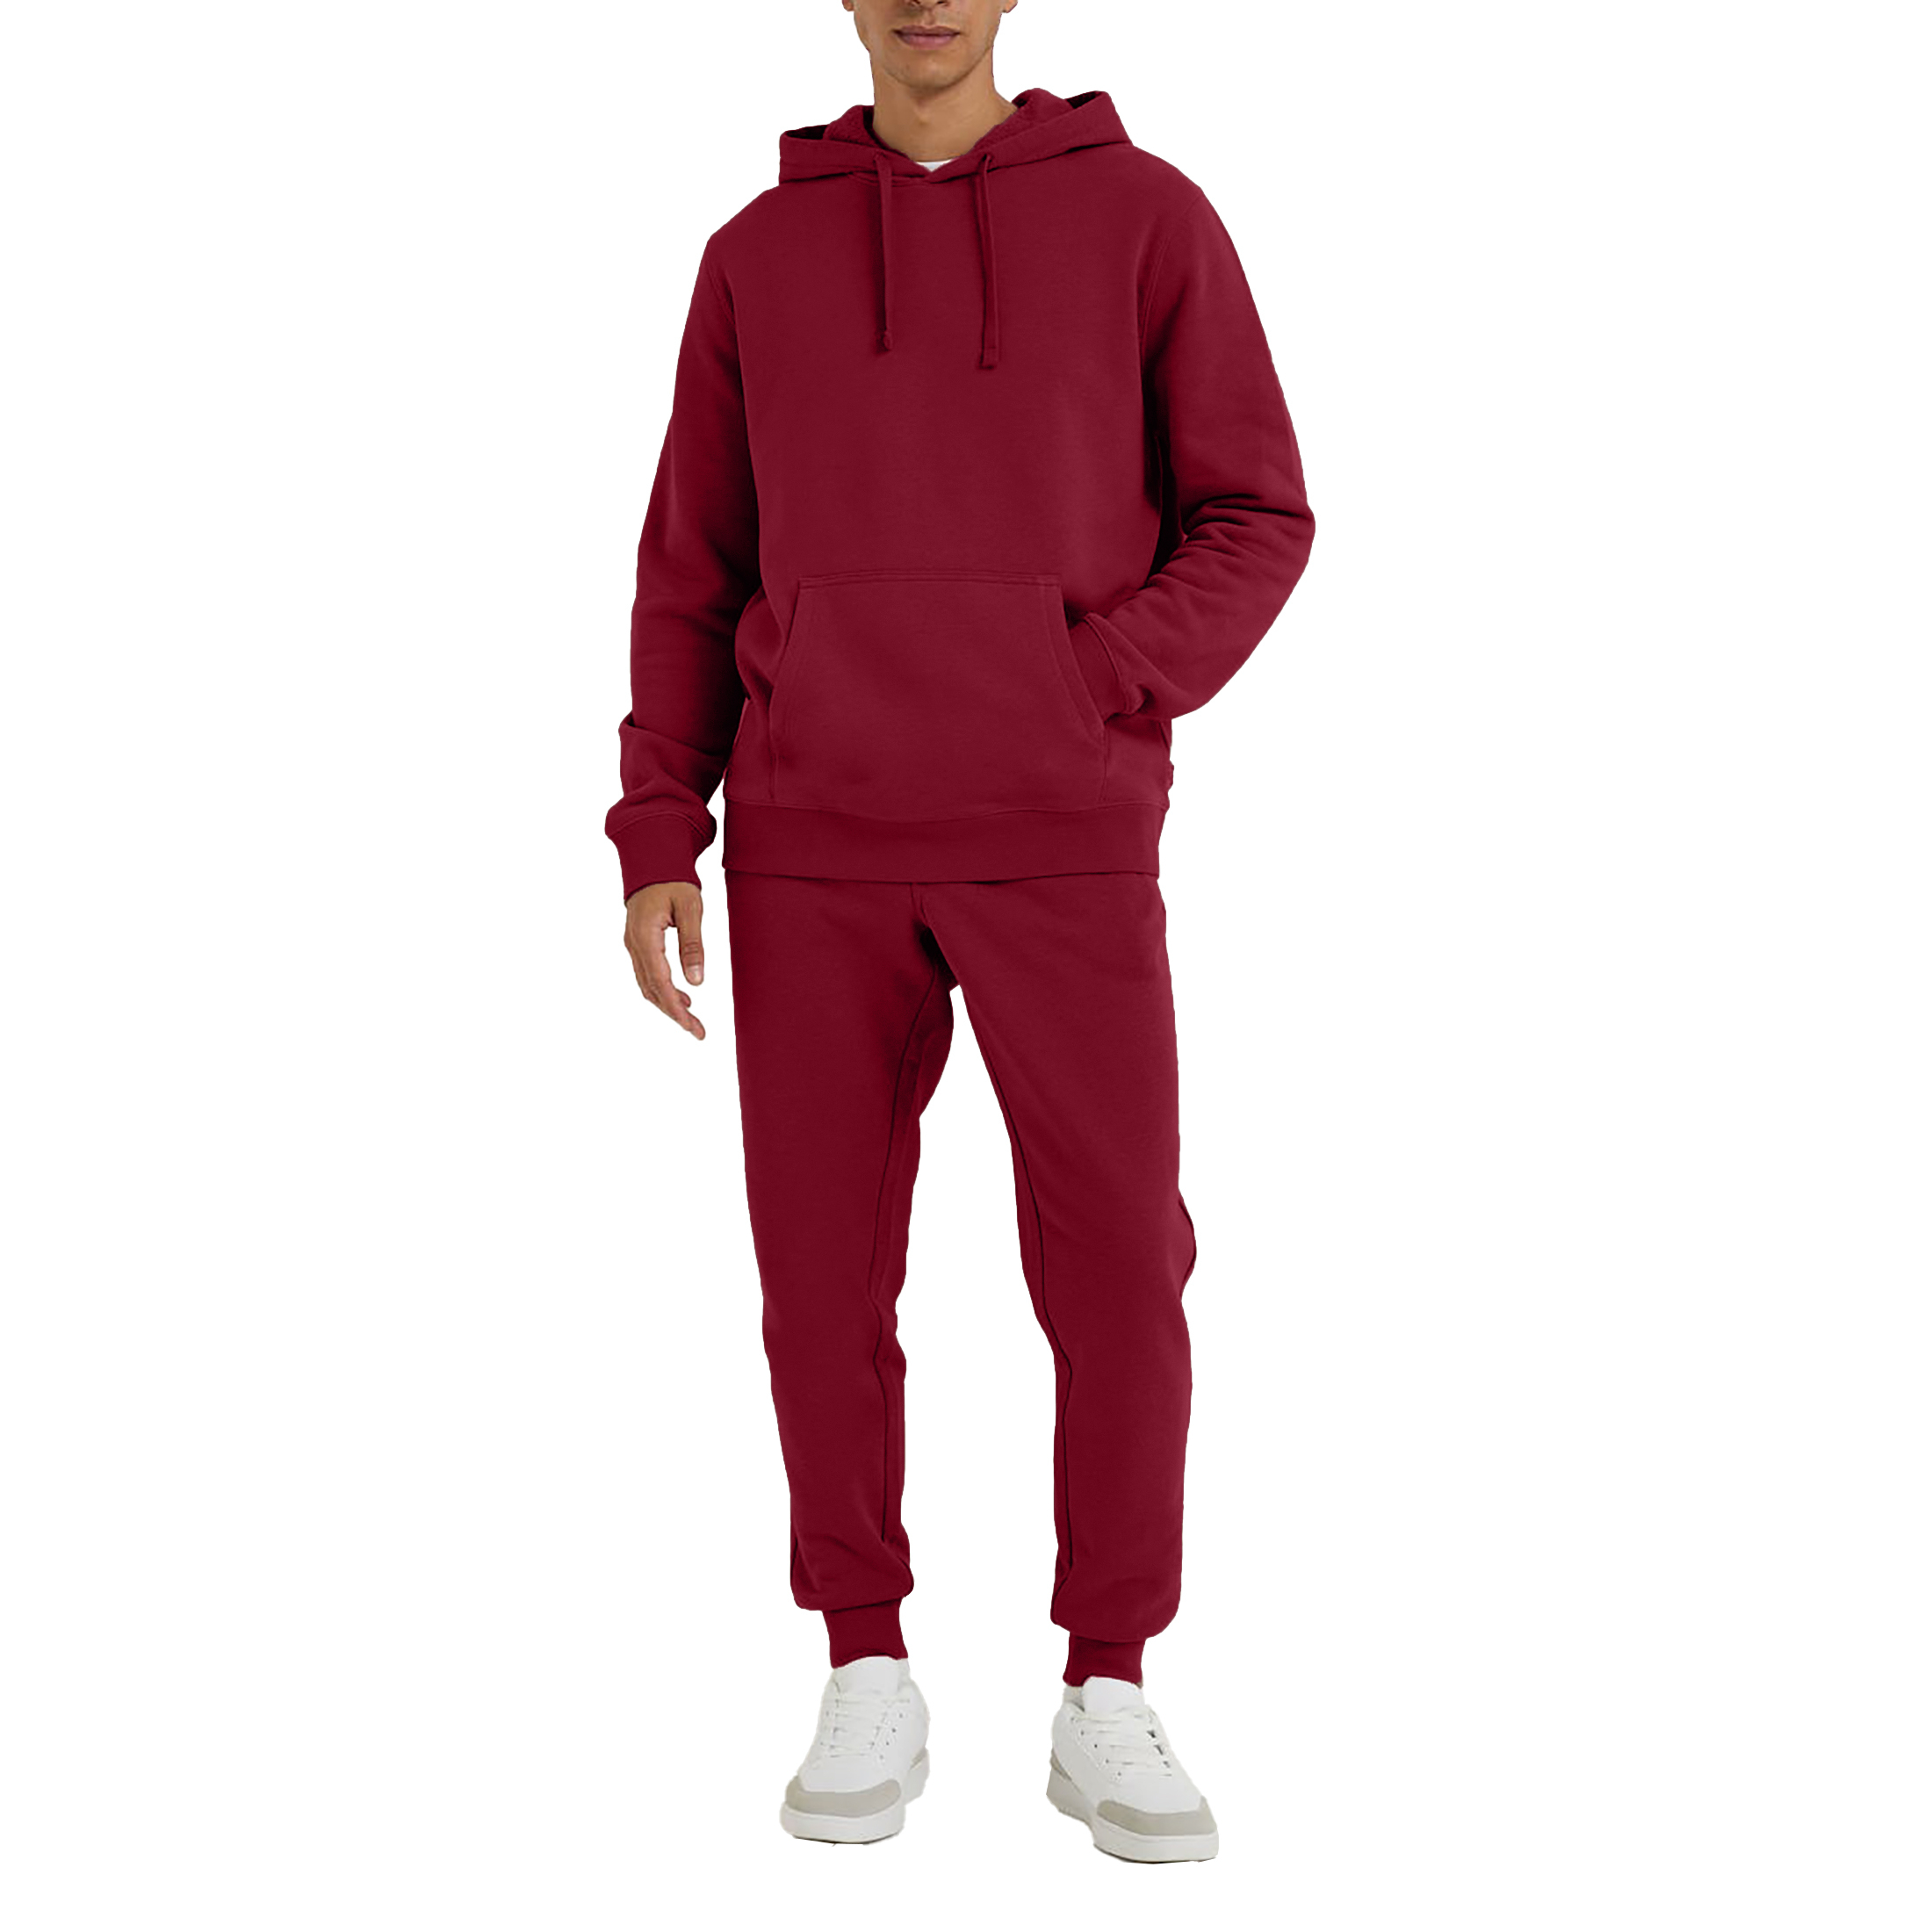 Men's Athletic Warm Jogging Pullover Active Tracksuit - Red, 3X-Large